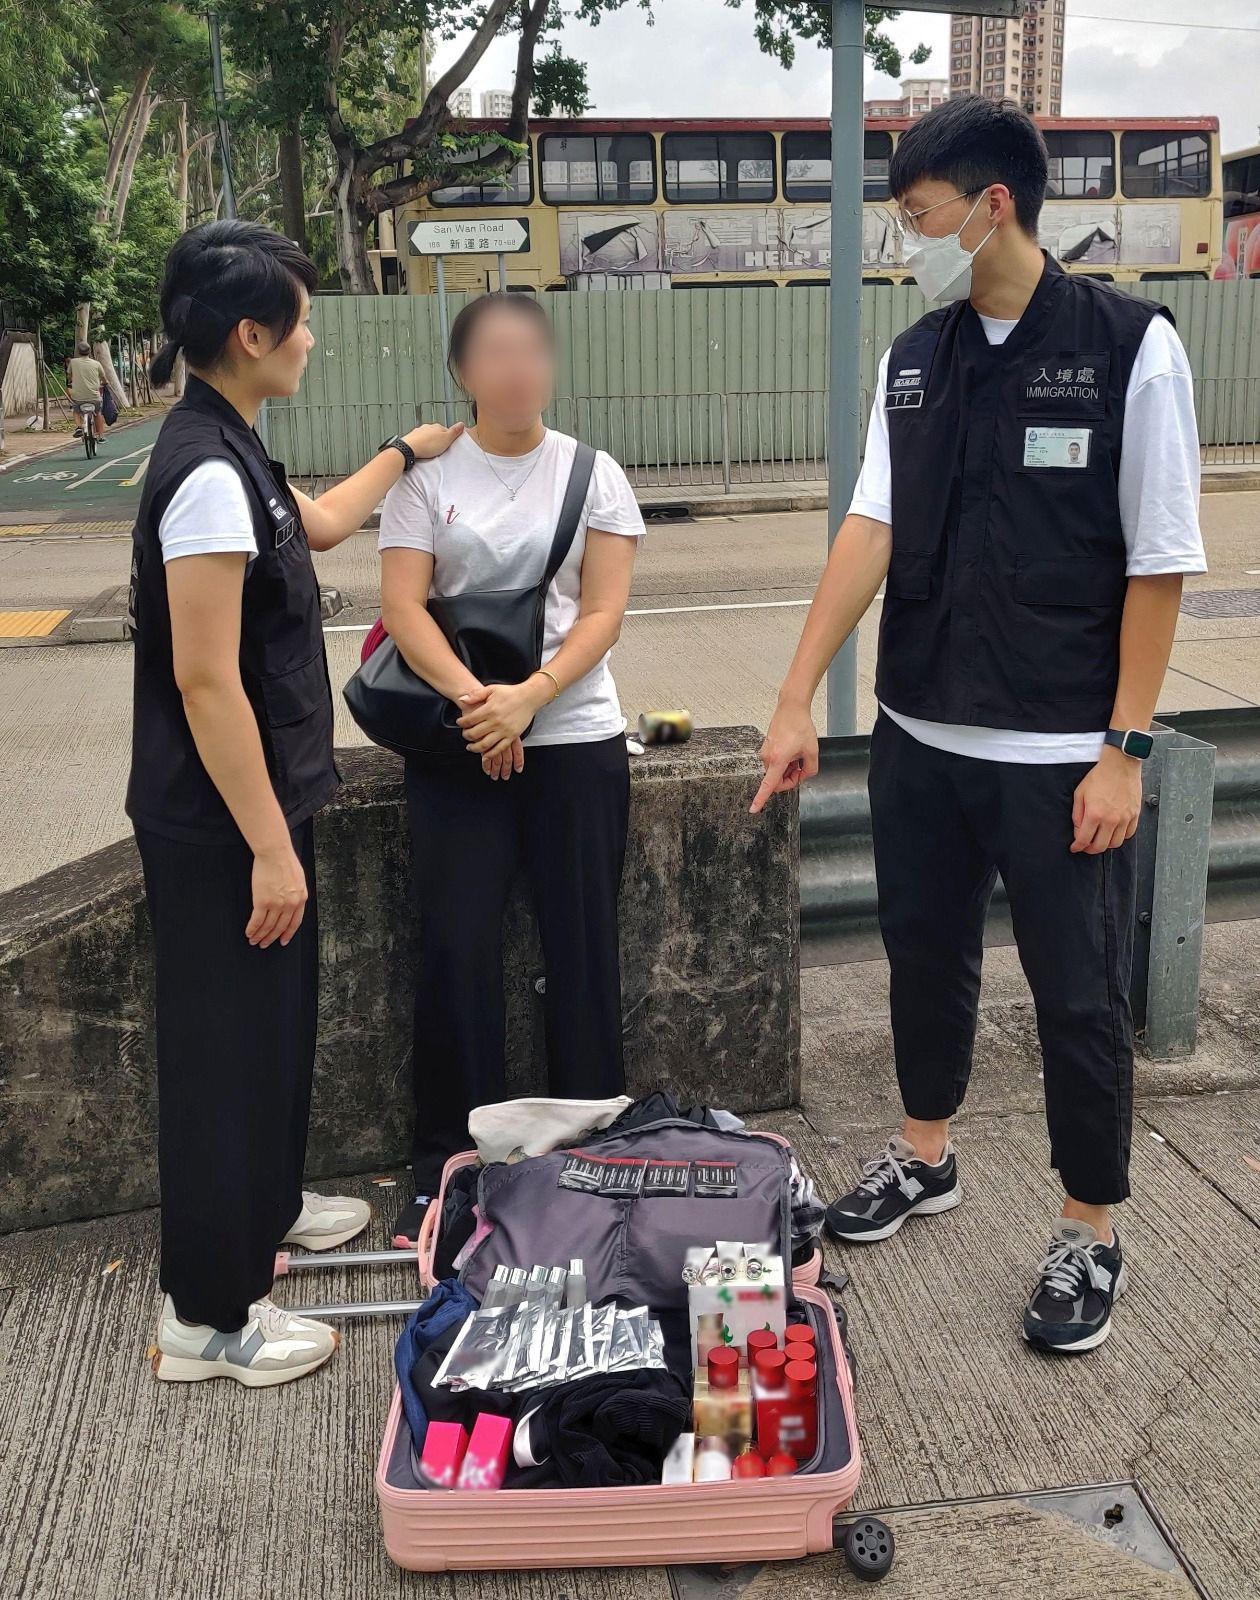 The Immigration Department mounted a series of territory-wide anti-illegal worker operations codenamed "Contribute" and "Twilight", and joint operations with the Hong Kong Police Force codenamed "Champion" and "Windsand", for four consecutive days from August 21 to yesterday (August 24). Photo shows a Mainland visitor involved in suspected parallel trading activities and her goods.